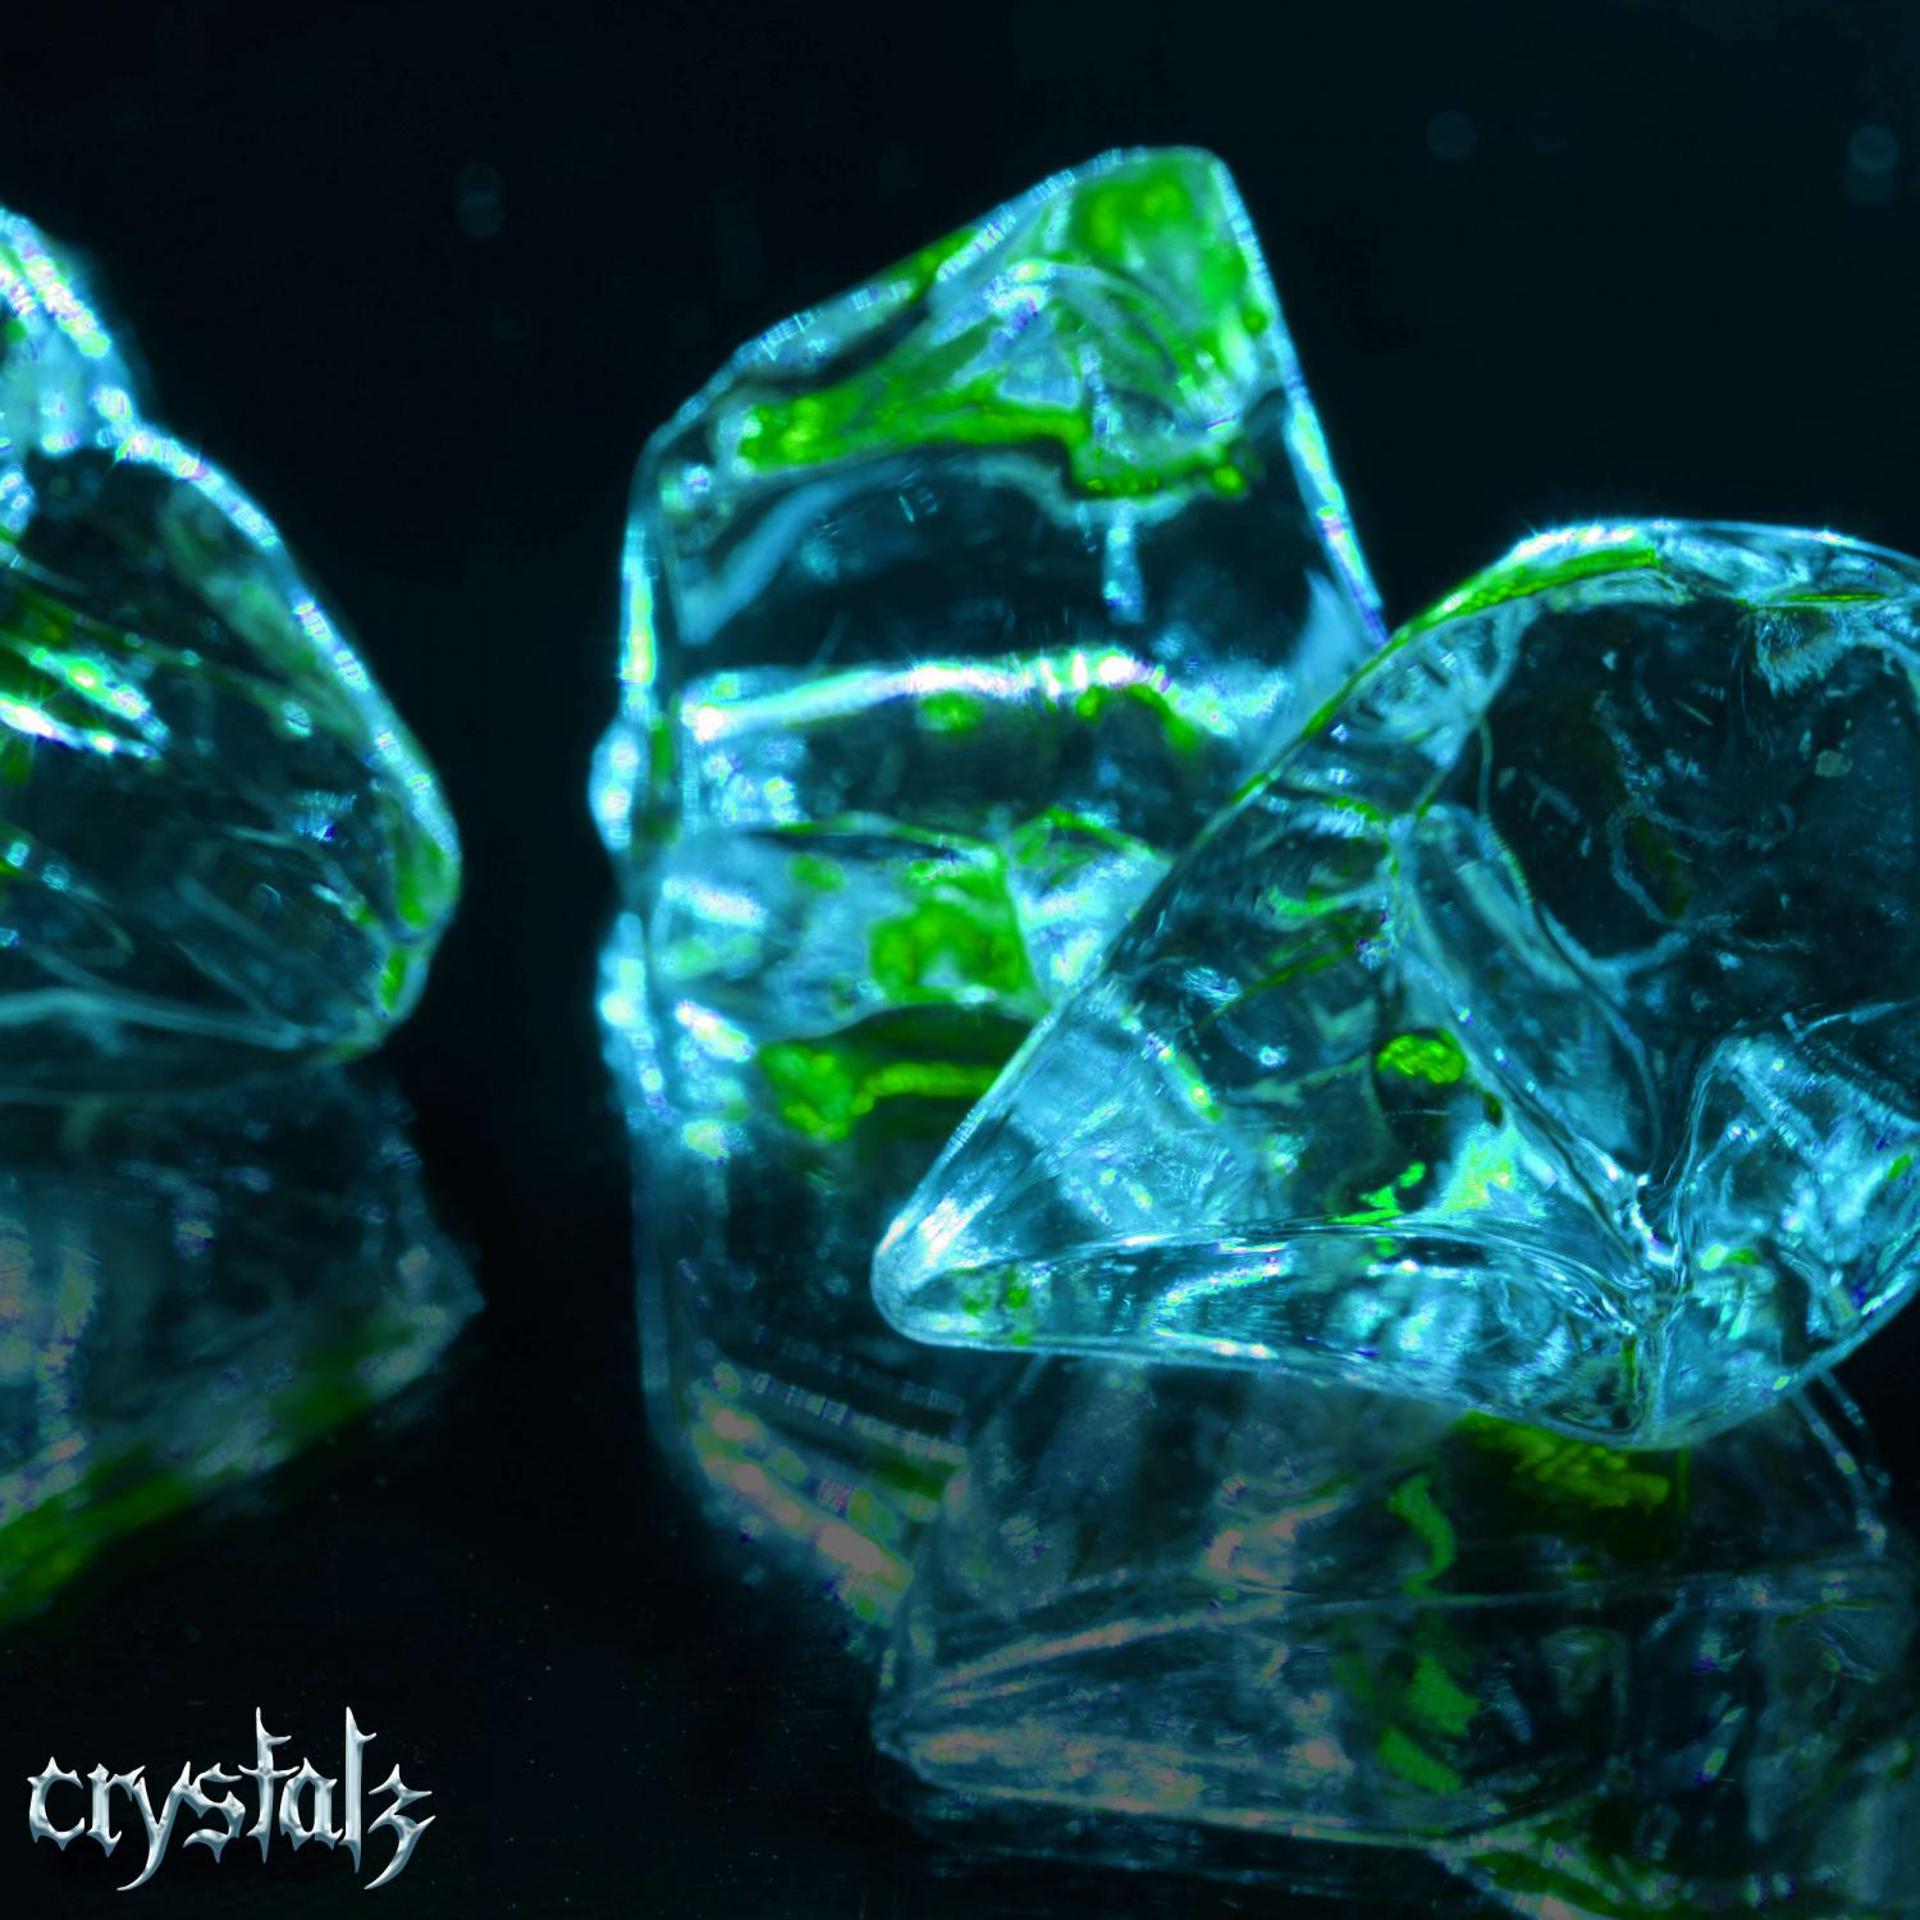 Crystals isolate exe speed. Crystals isolate ФОНК. Crystals isolate.exe. Phonk - Crystal - isolate. Crystals pr1svx.